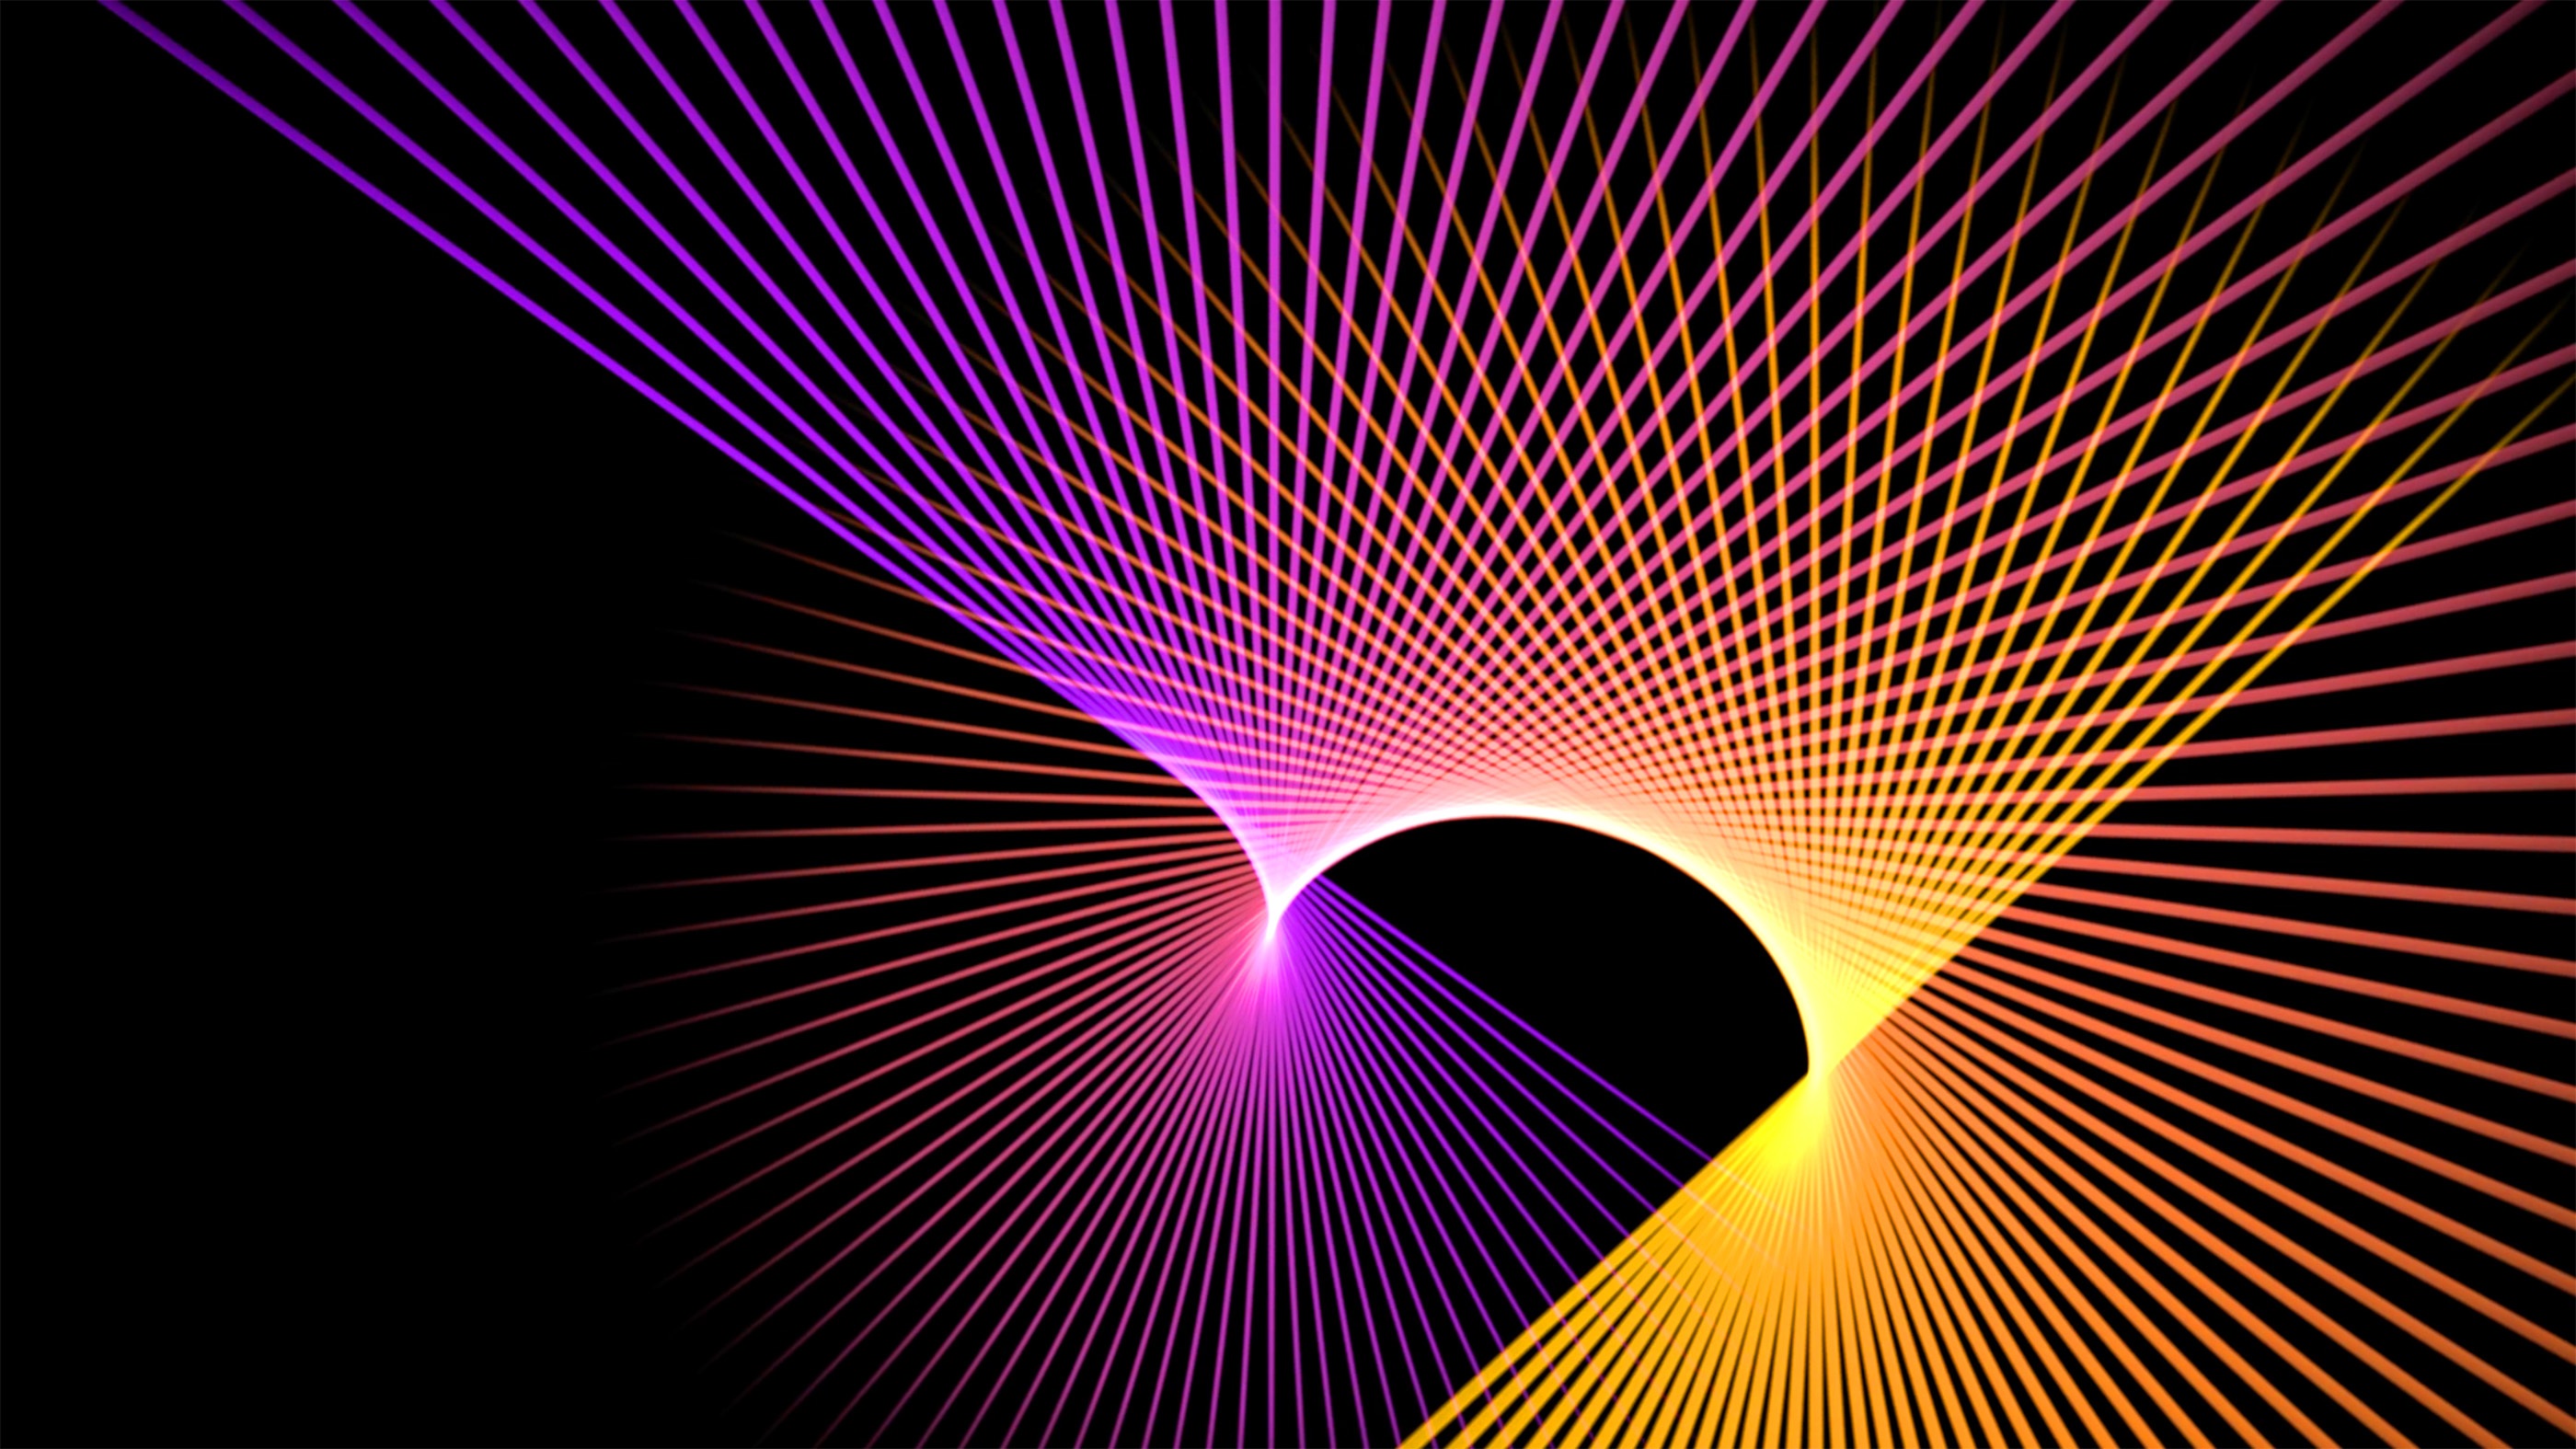 Dark background, Waves, Colorful, Yellow, Rays, Purple Gallery HD Wallpaper